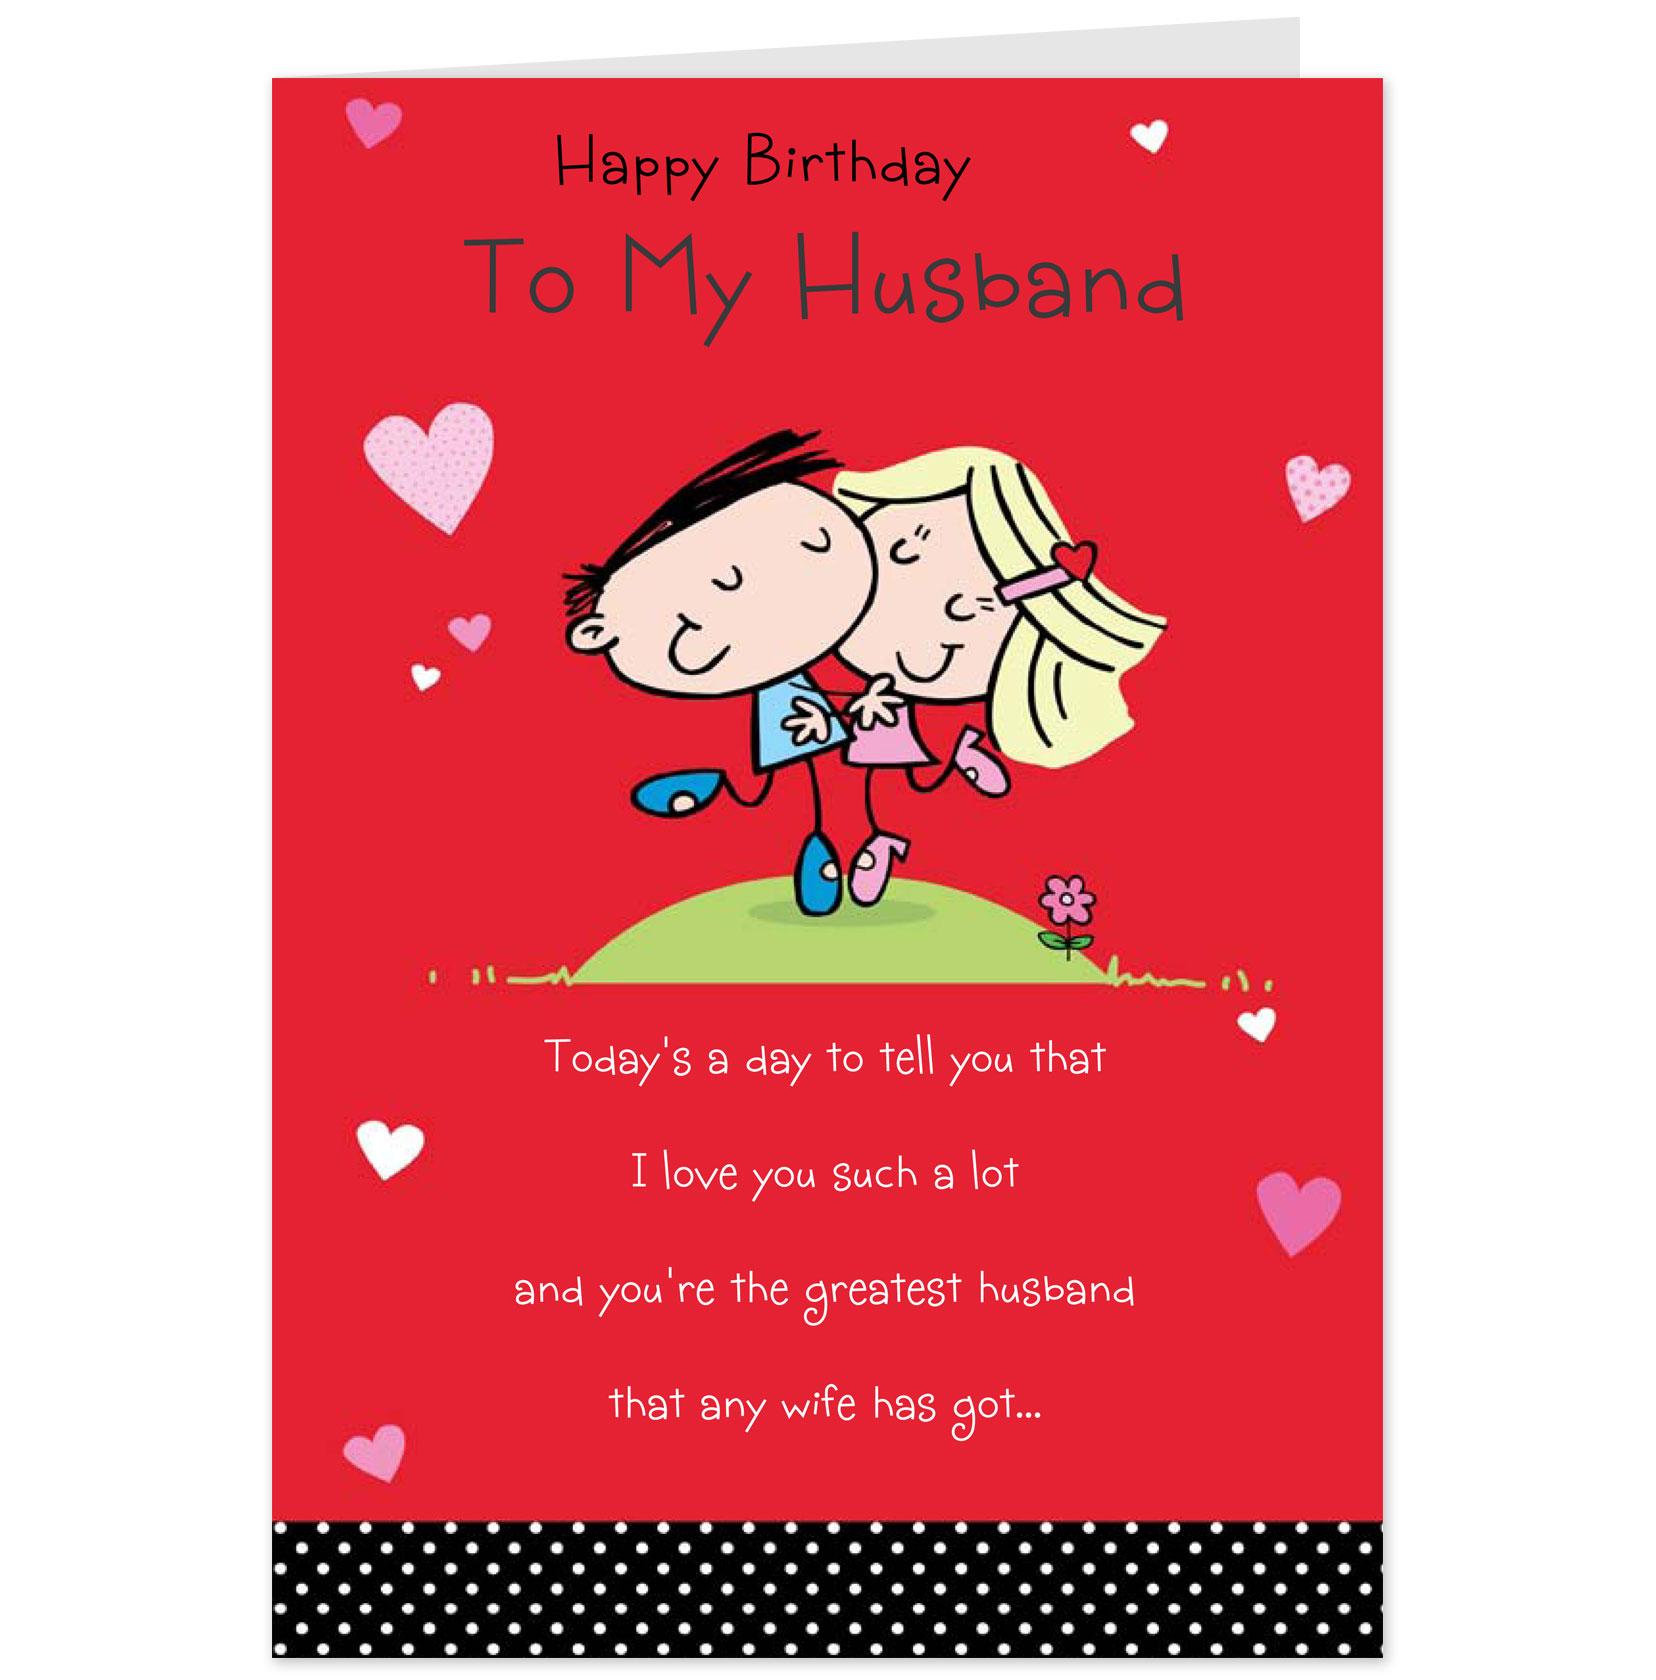 7 Best Images of Husband Birthday Greetings Printable Birthday Cards